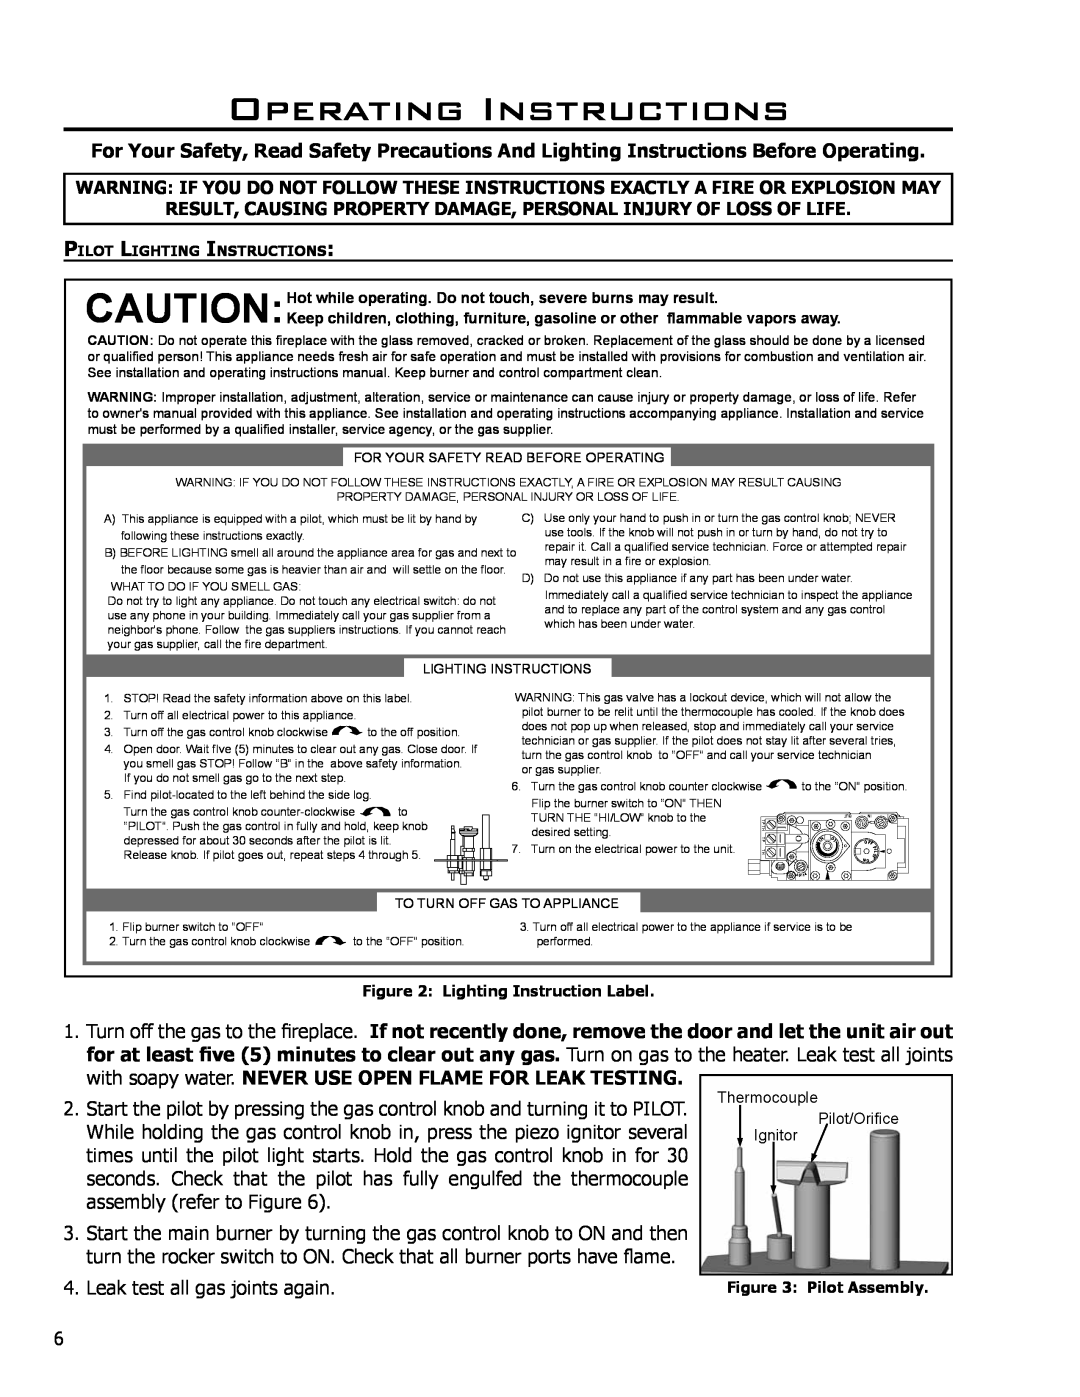 Enviro C-11500 owner manual Operating Instructions, Leak test all gas joints again 